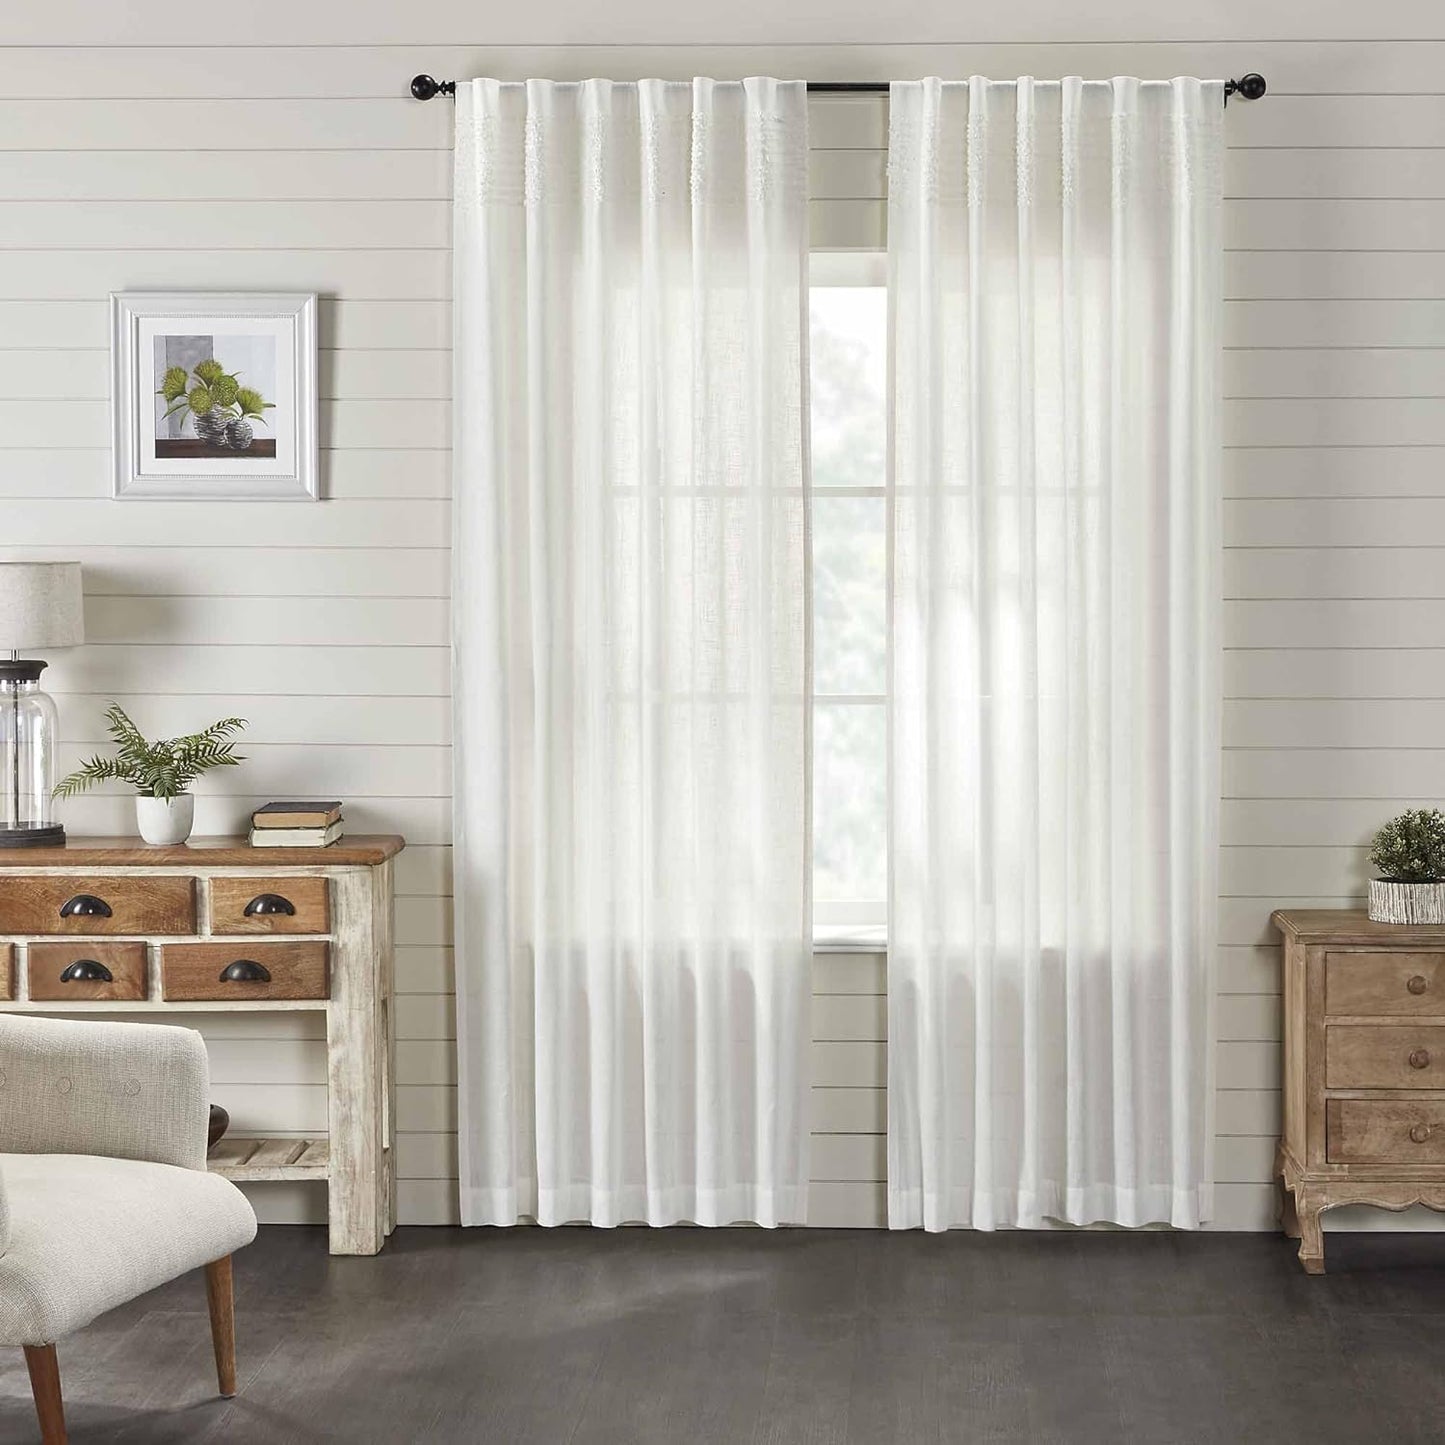 Kathryn Tier Curtains, Set of 2, 24" Long, Ruffled Curtains in a Linen-Look Soft White Cotton Semi-Sheer Fabric, Farmhouse, Cottage, Country Style Sheer Kitchen Café Curtains  Piper Classics 96" Panels  